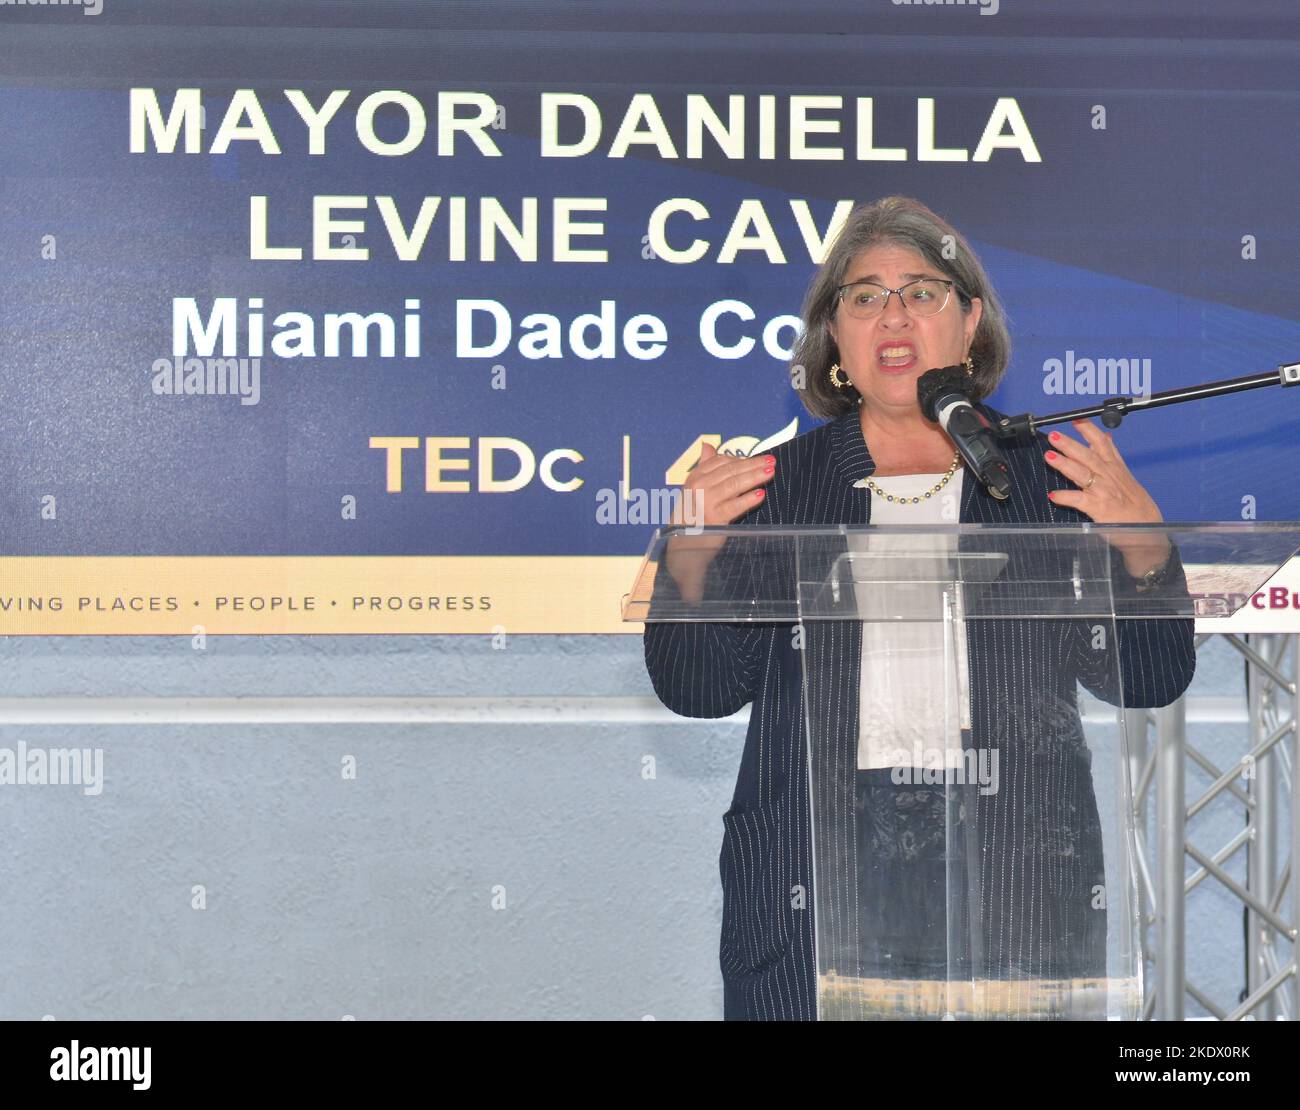 MIAMI, FLORIDA - NOVEMBER 03: Daniella Levine Cava, Mayor of Miami-Dade County attends the ribbon cutting, ground breaking and grand opening of two of TEDc's newest affordable housing developments at Edison Place on November 03, 2022 in Miami, Florida. (Photo by JL/Sipa USA) Credit: Sipa USA/Alamy Live News Stock Photo